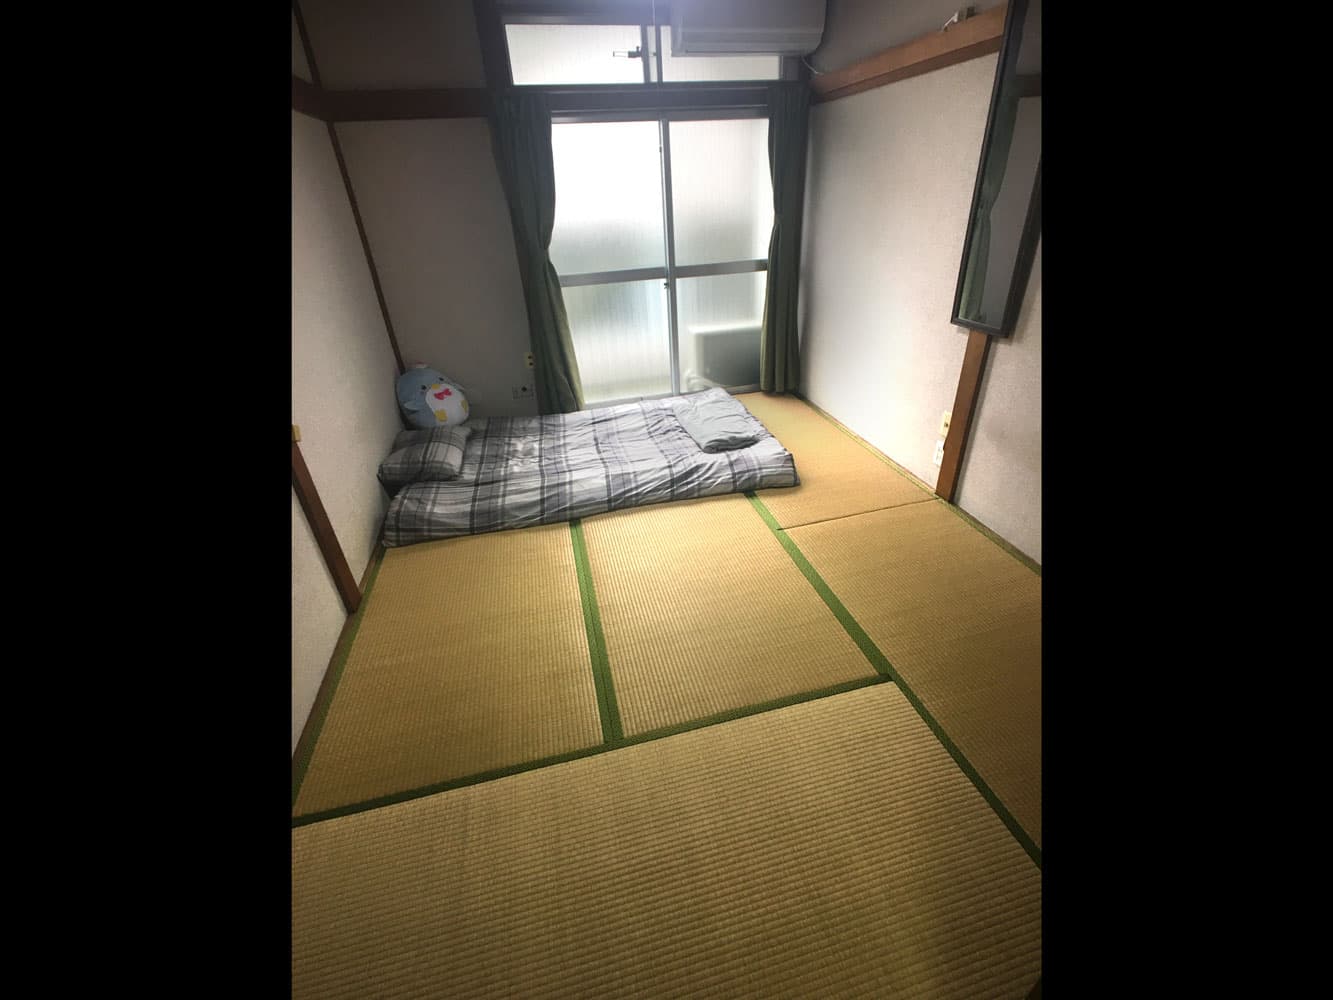 The traditional Japanese bedroom at Mitaka House, with a futon to sleep on tatami mats.